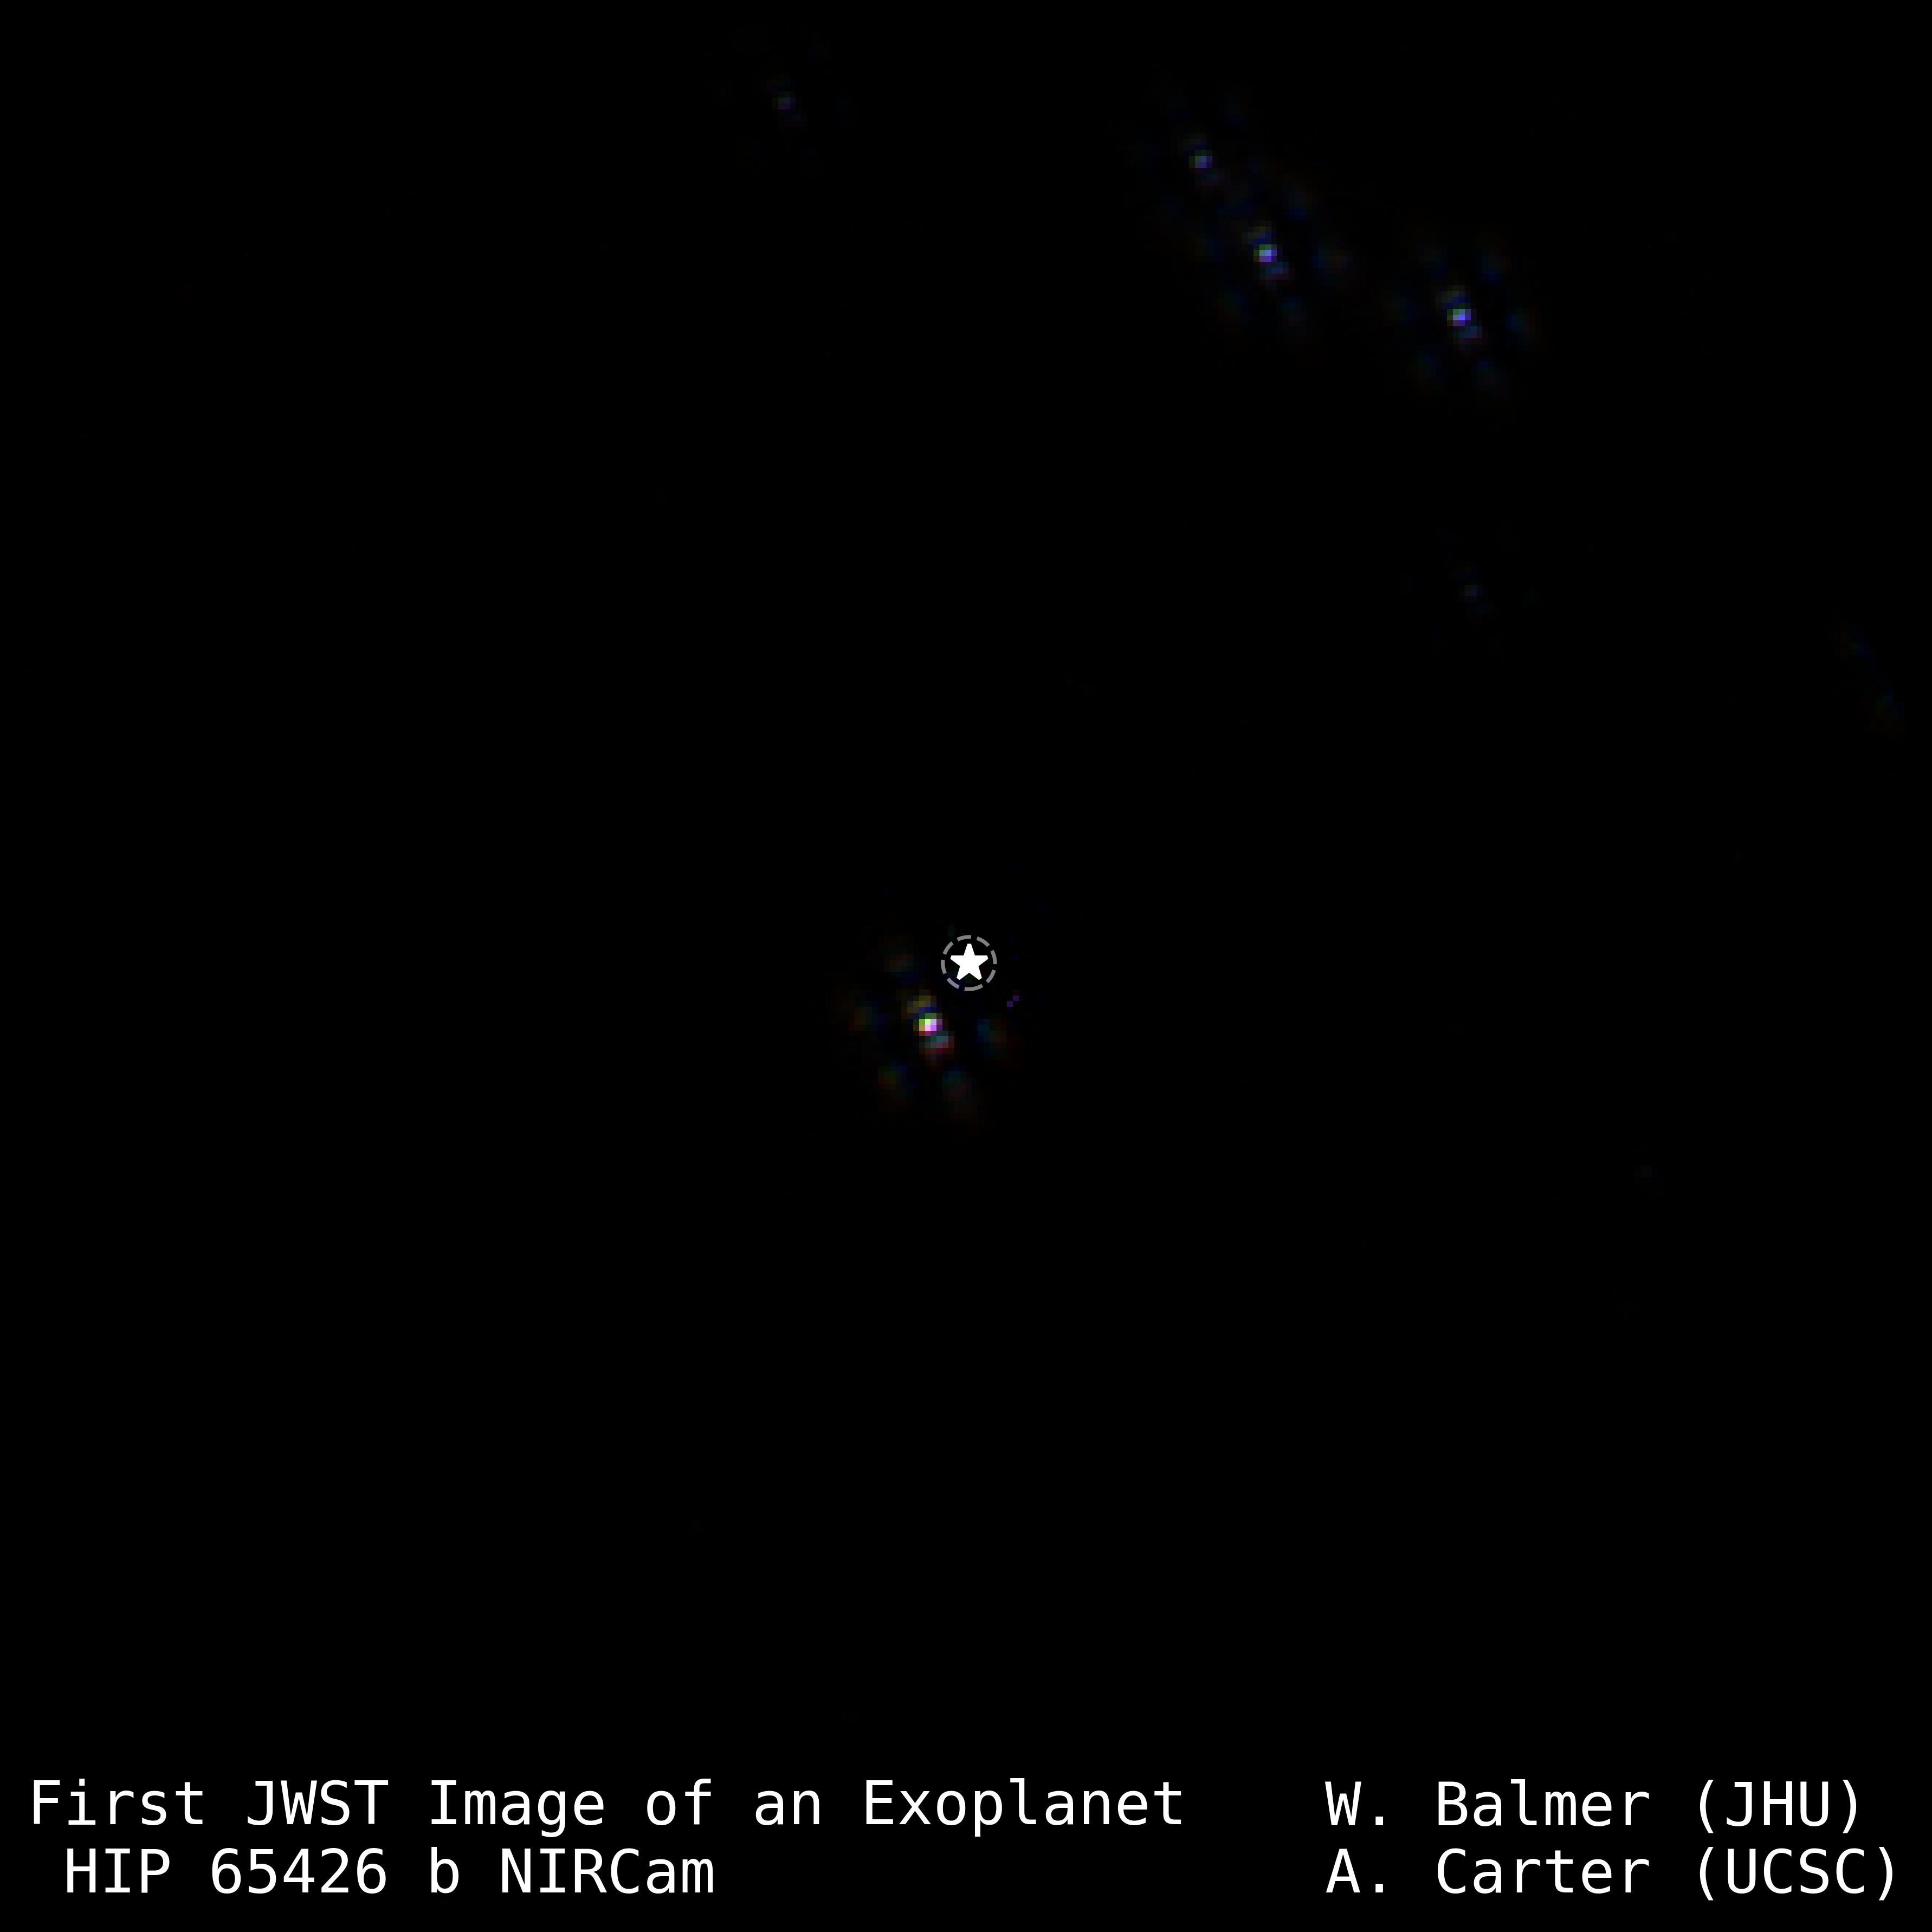 i helped capture the first image of an exoplanet taken with JWST!